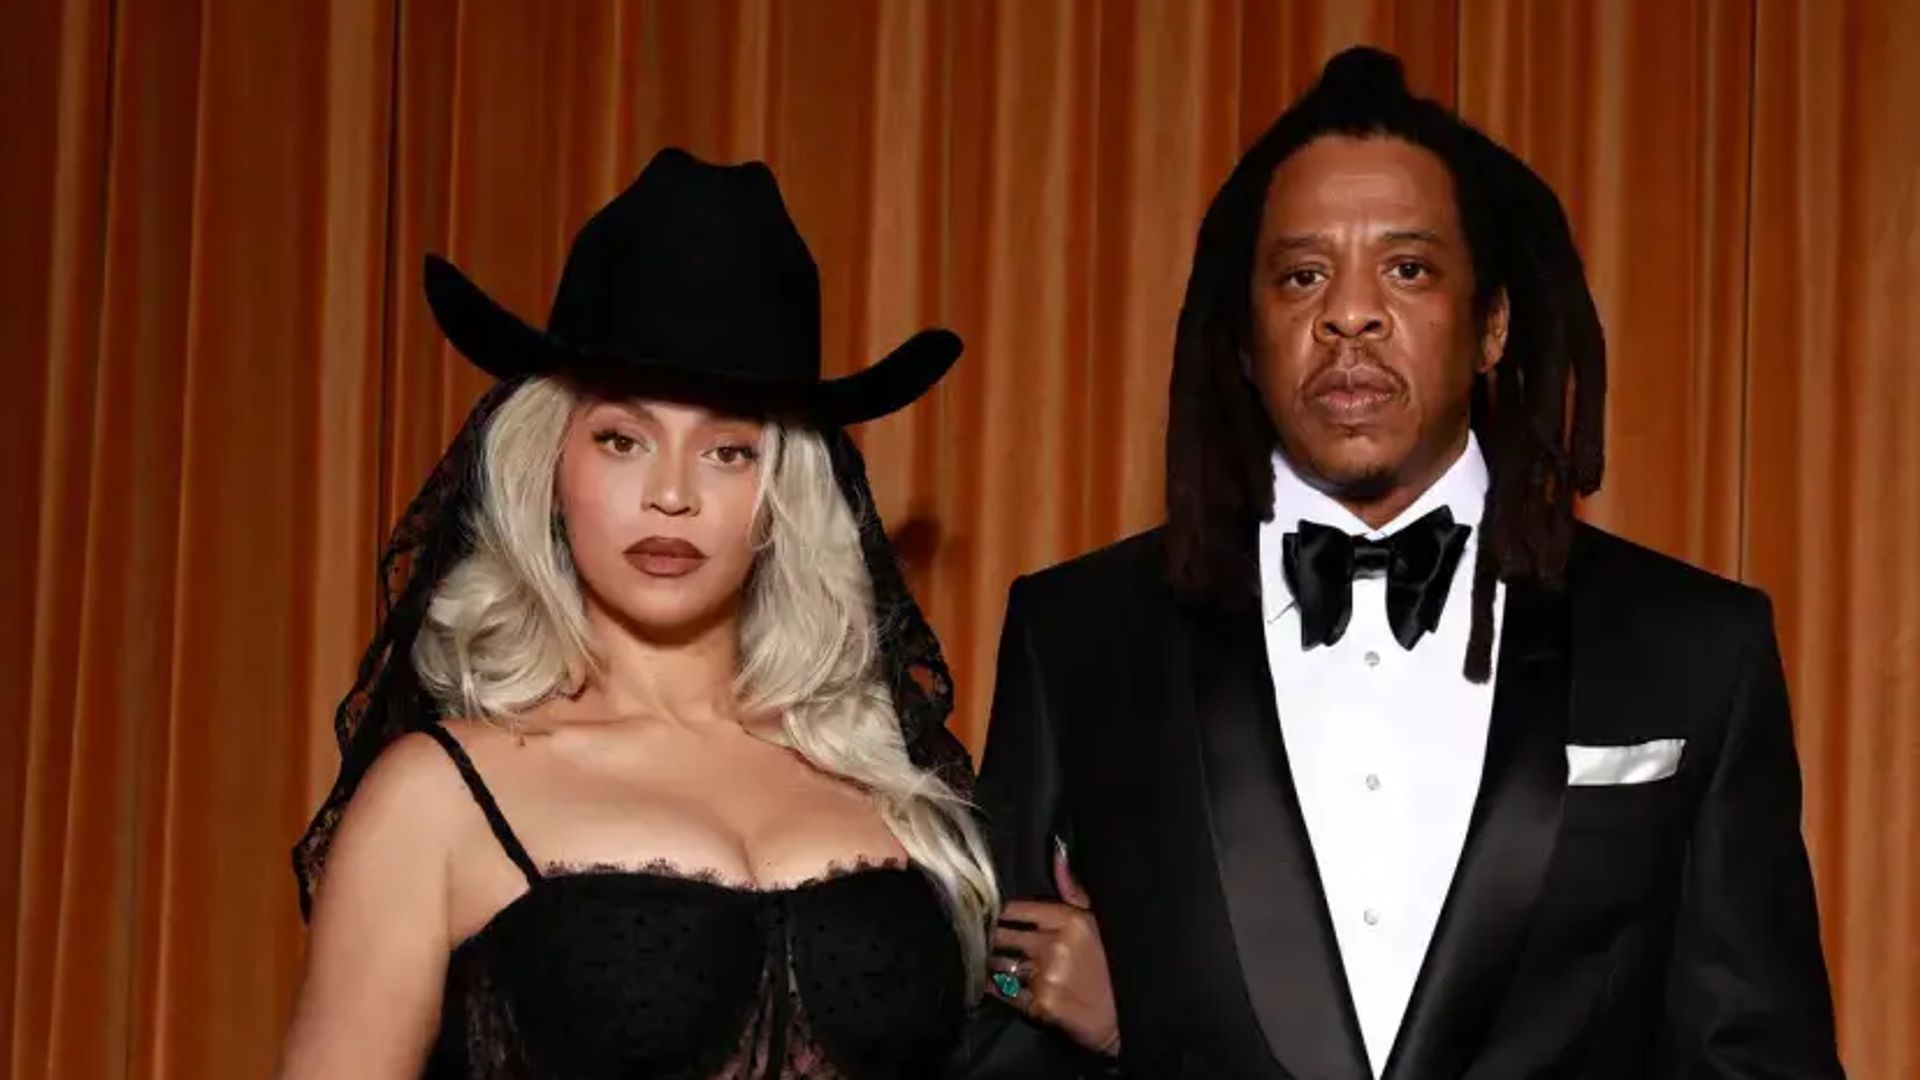 Beyonce’s jaw-dropping looks for date night with Jay-Z are her most daring yet